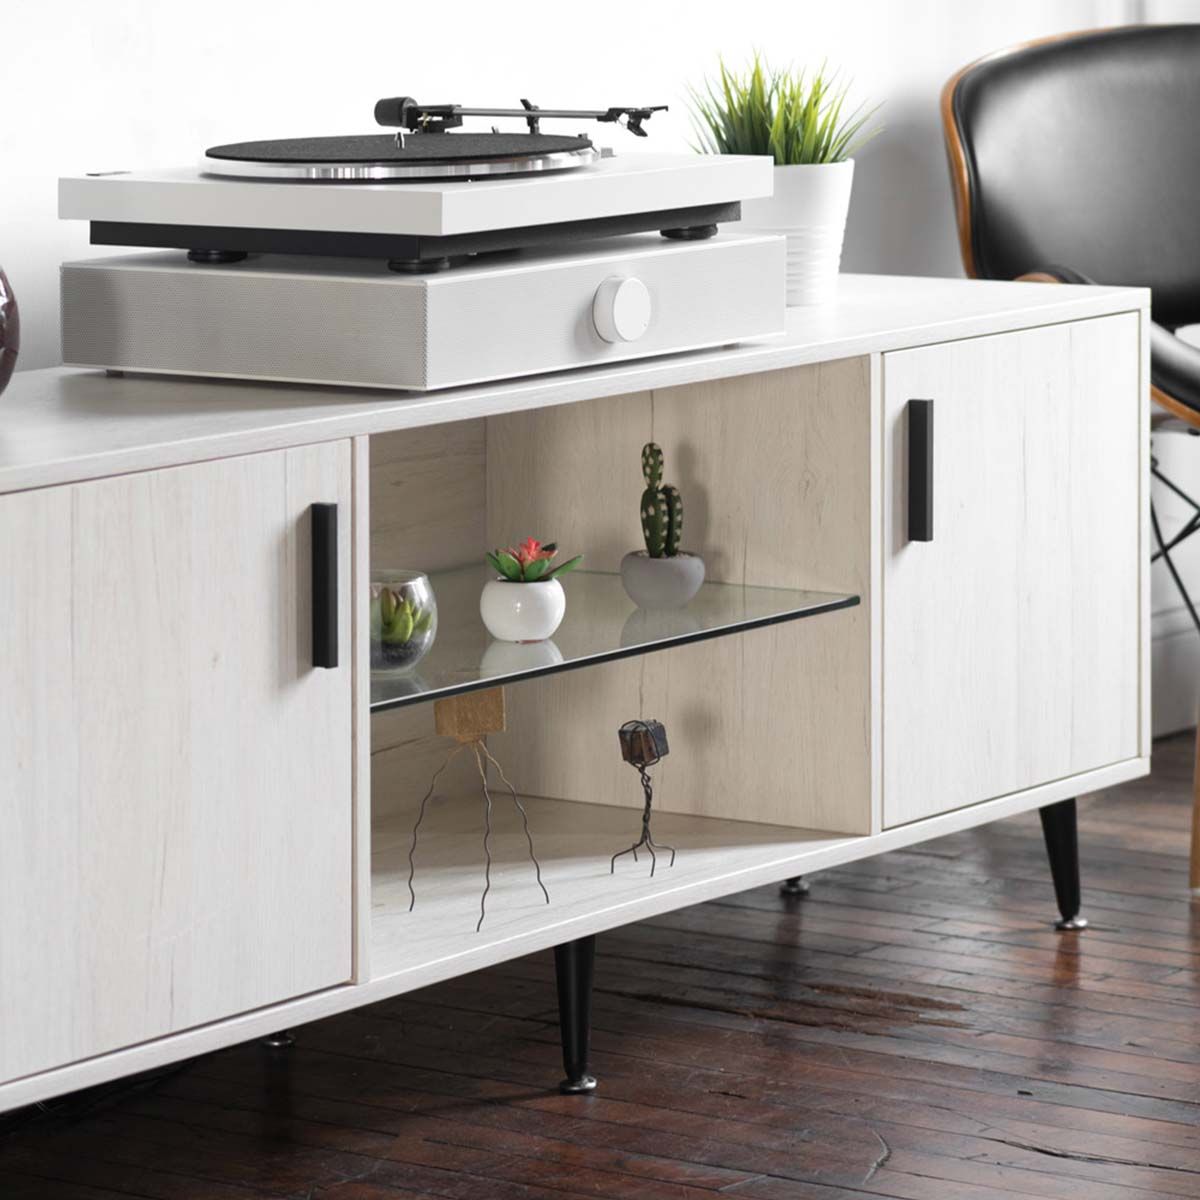 Andover SpinDeck Max Turntable, White, with SpinBase on top of white media cabinet